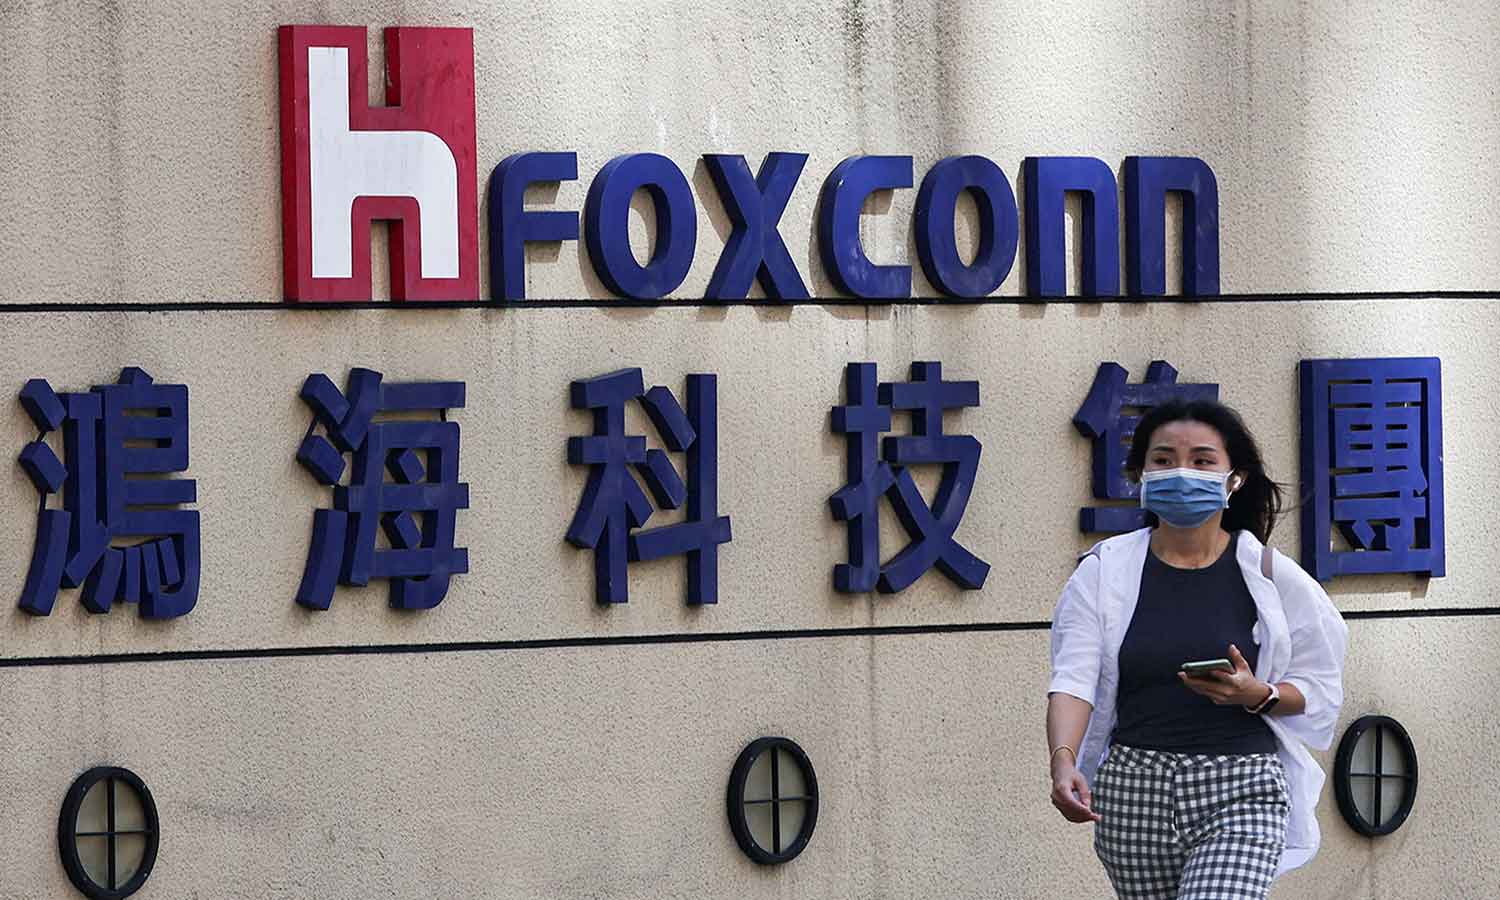 Foxconn invests $1.2 billion in India to create 100,000 new jobs